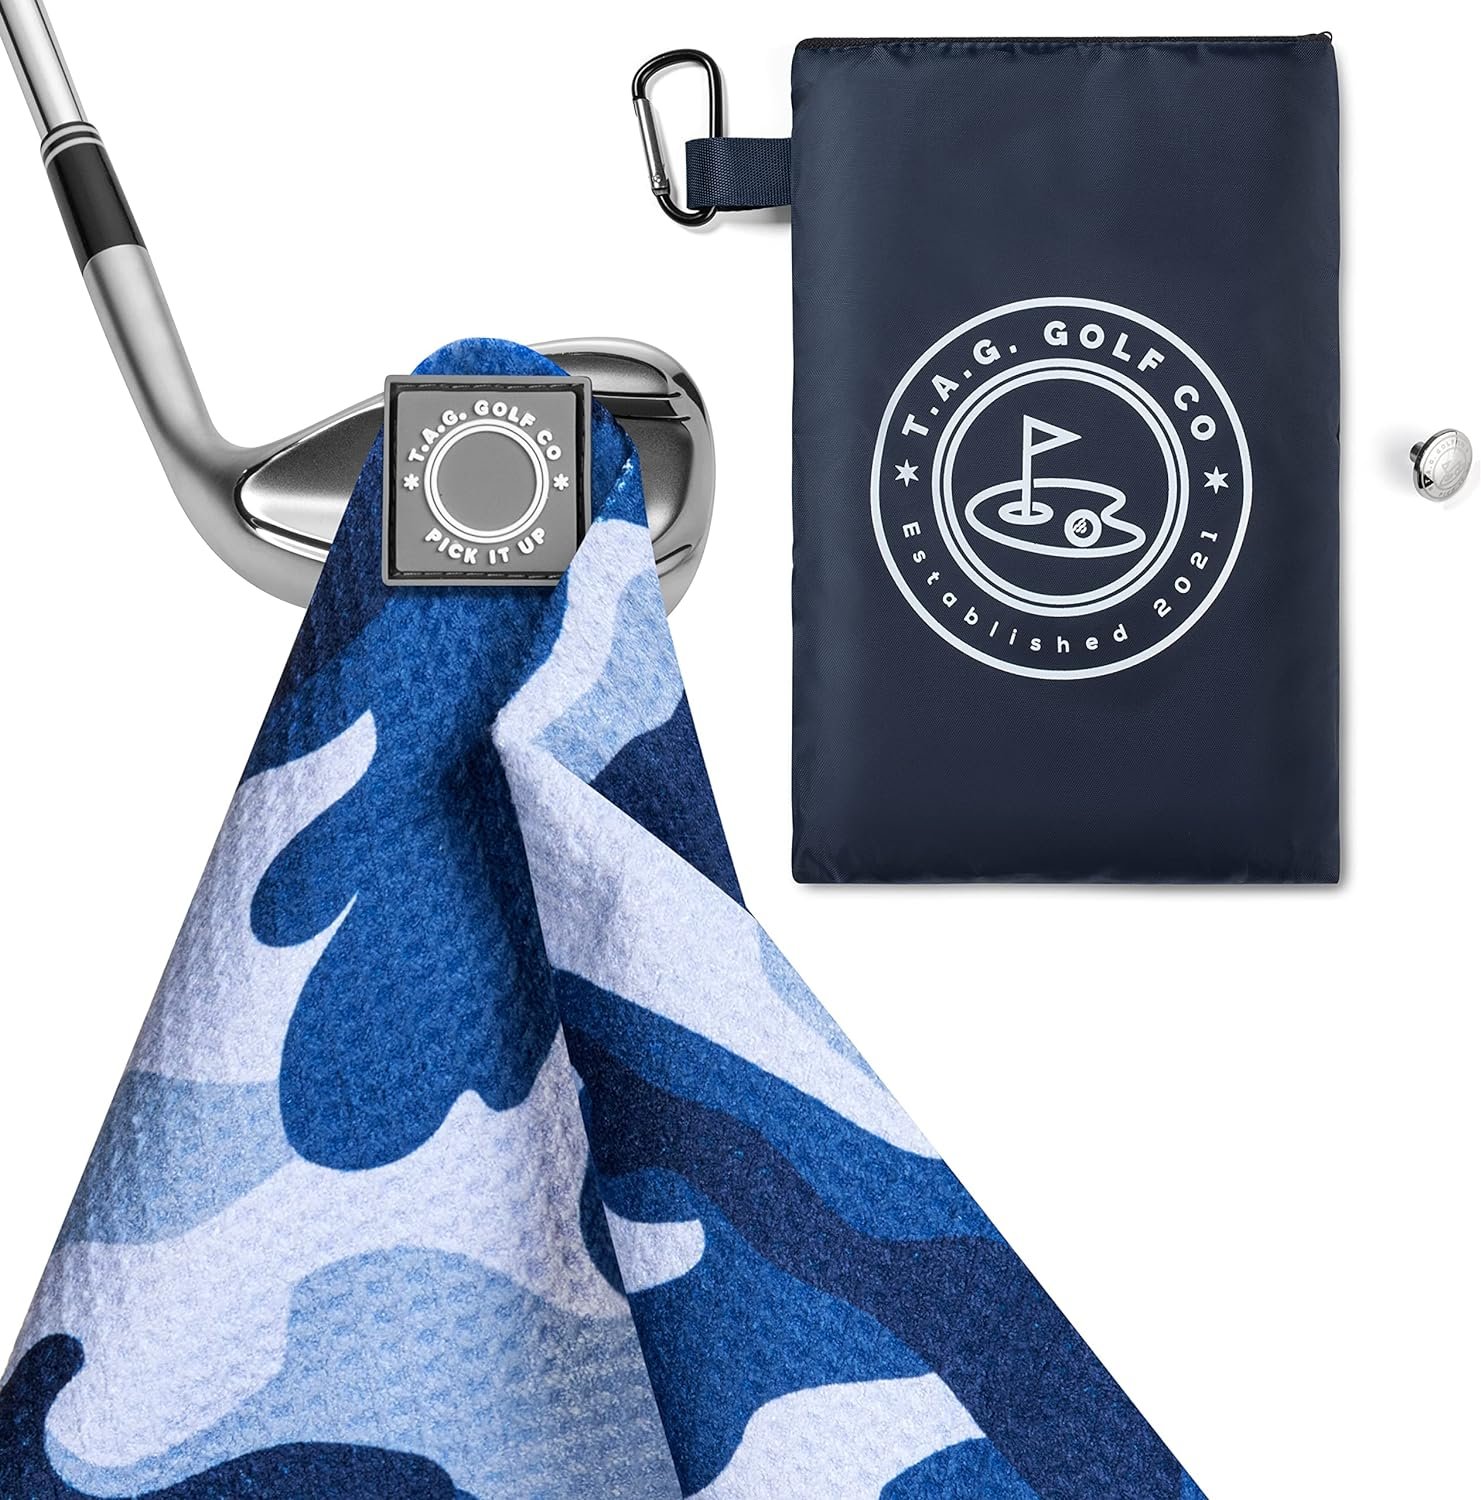 TAG Golf Co Magnetic Golf Towel - Signature Size - Camo Series - Blue Steel - Golf Training Aid - Industrial Strength Magnet - Stick it to Your Club or Putter